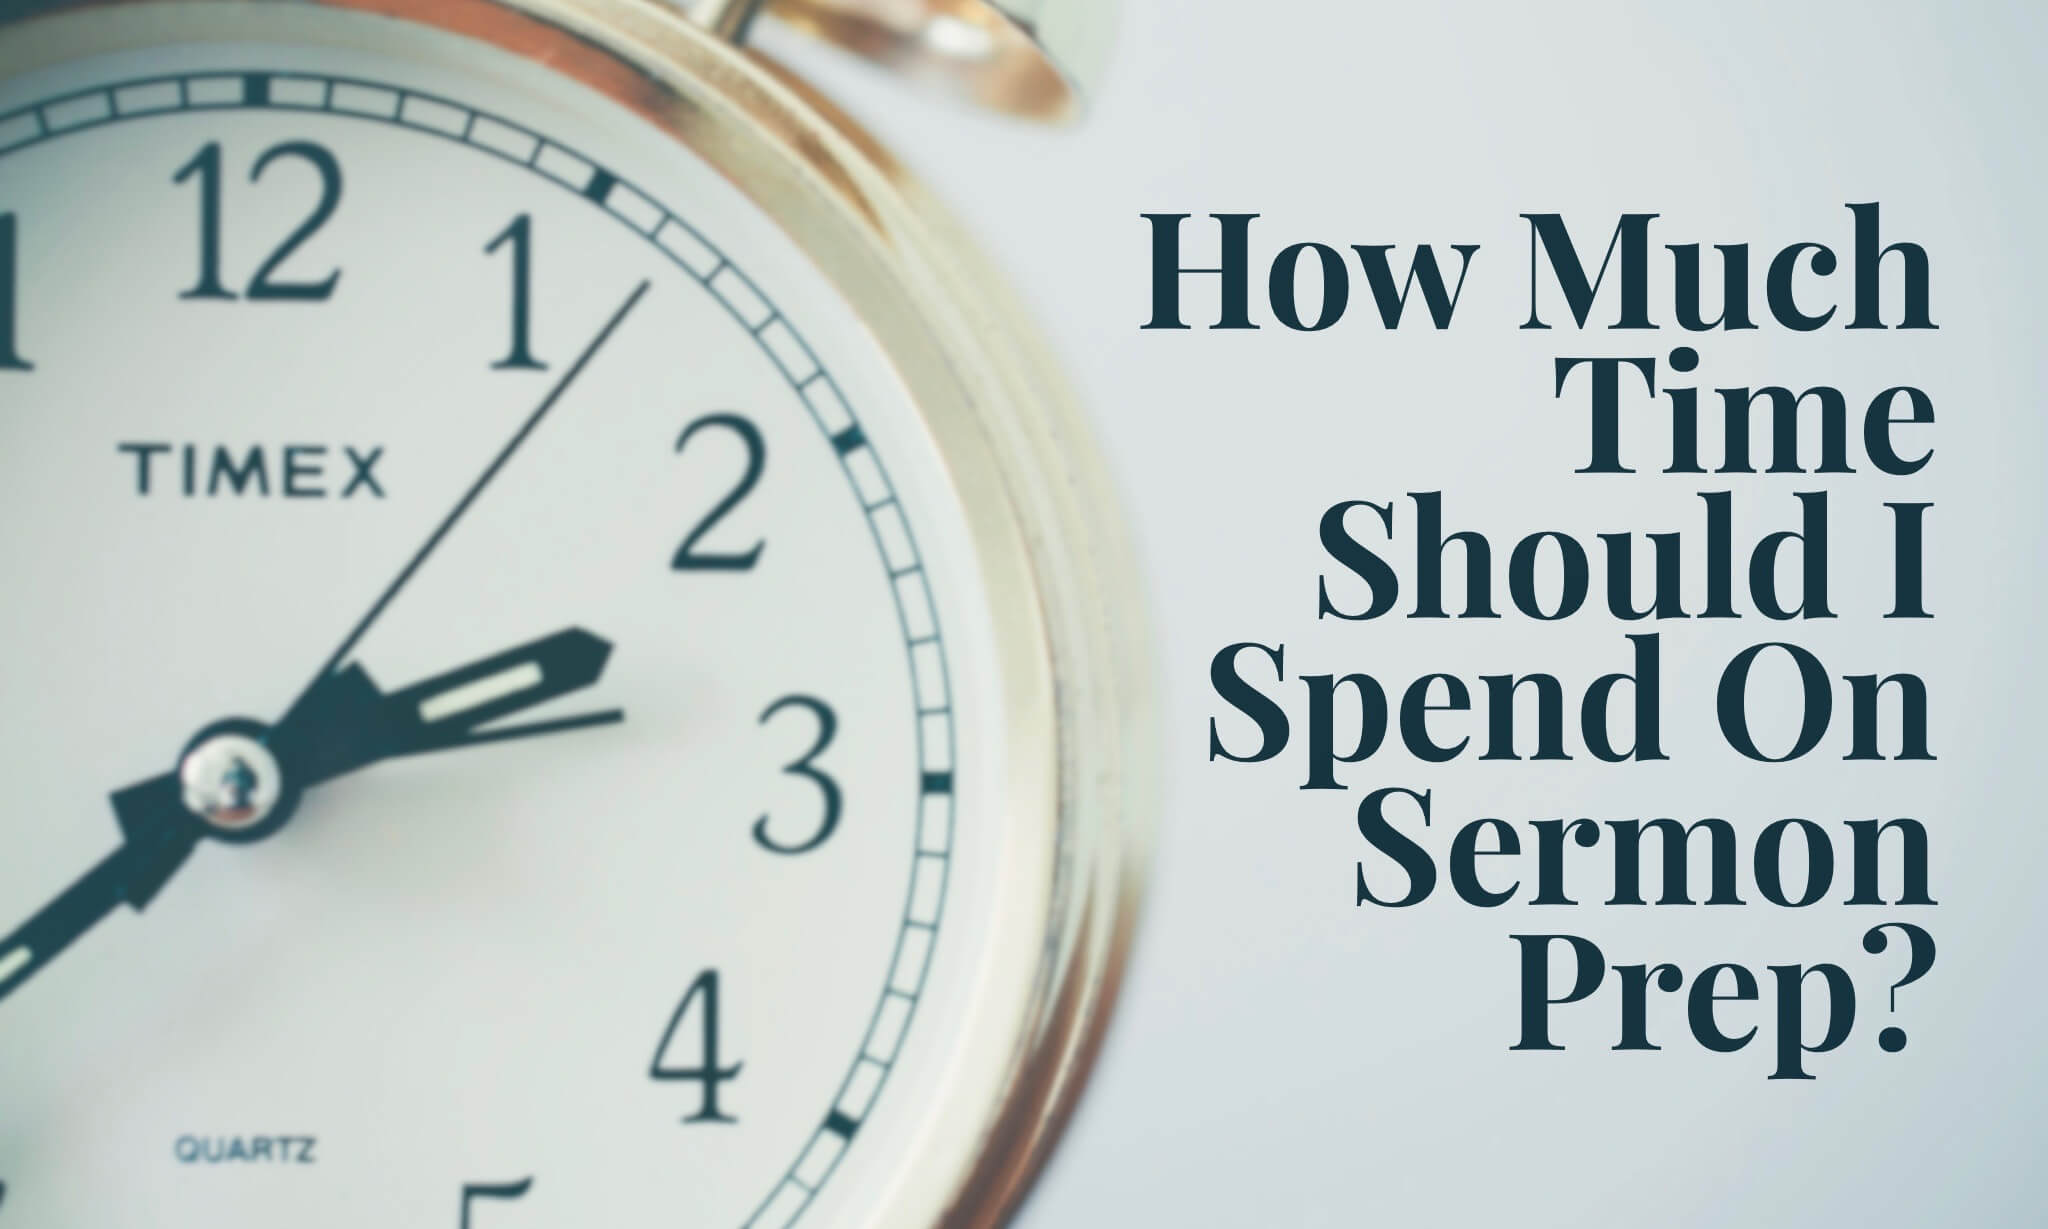 How much time should i spend on sermon prep?